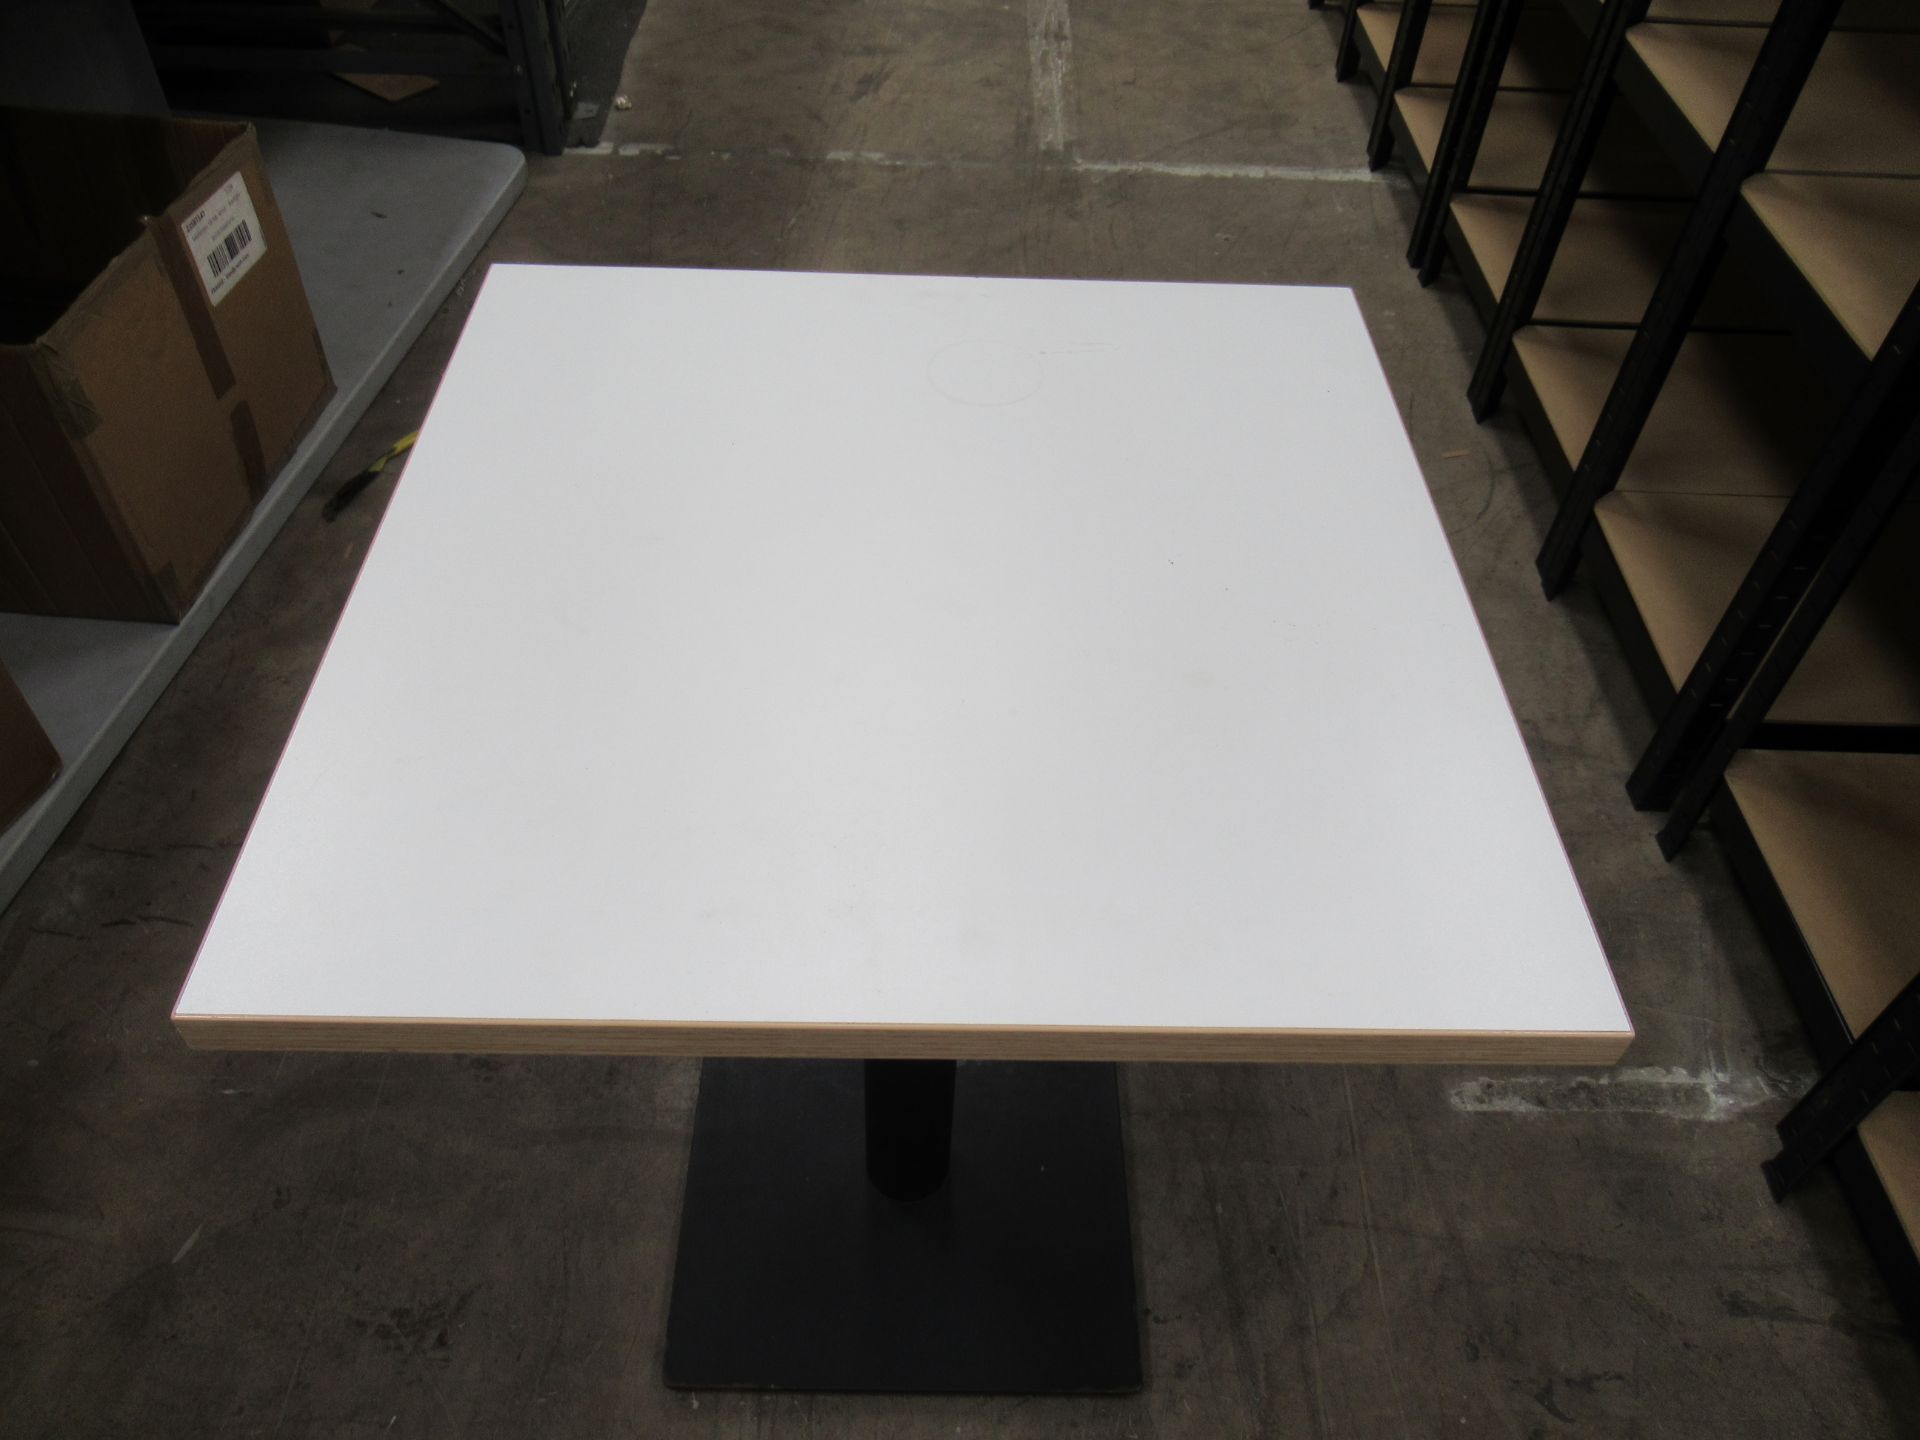 4x Square Top Bistro Tables - Image 2 of 2